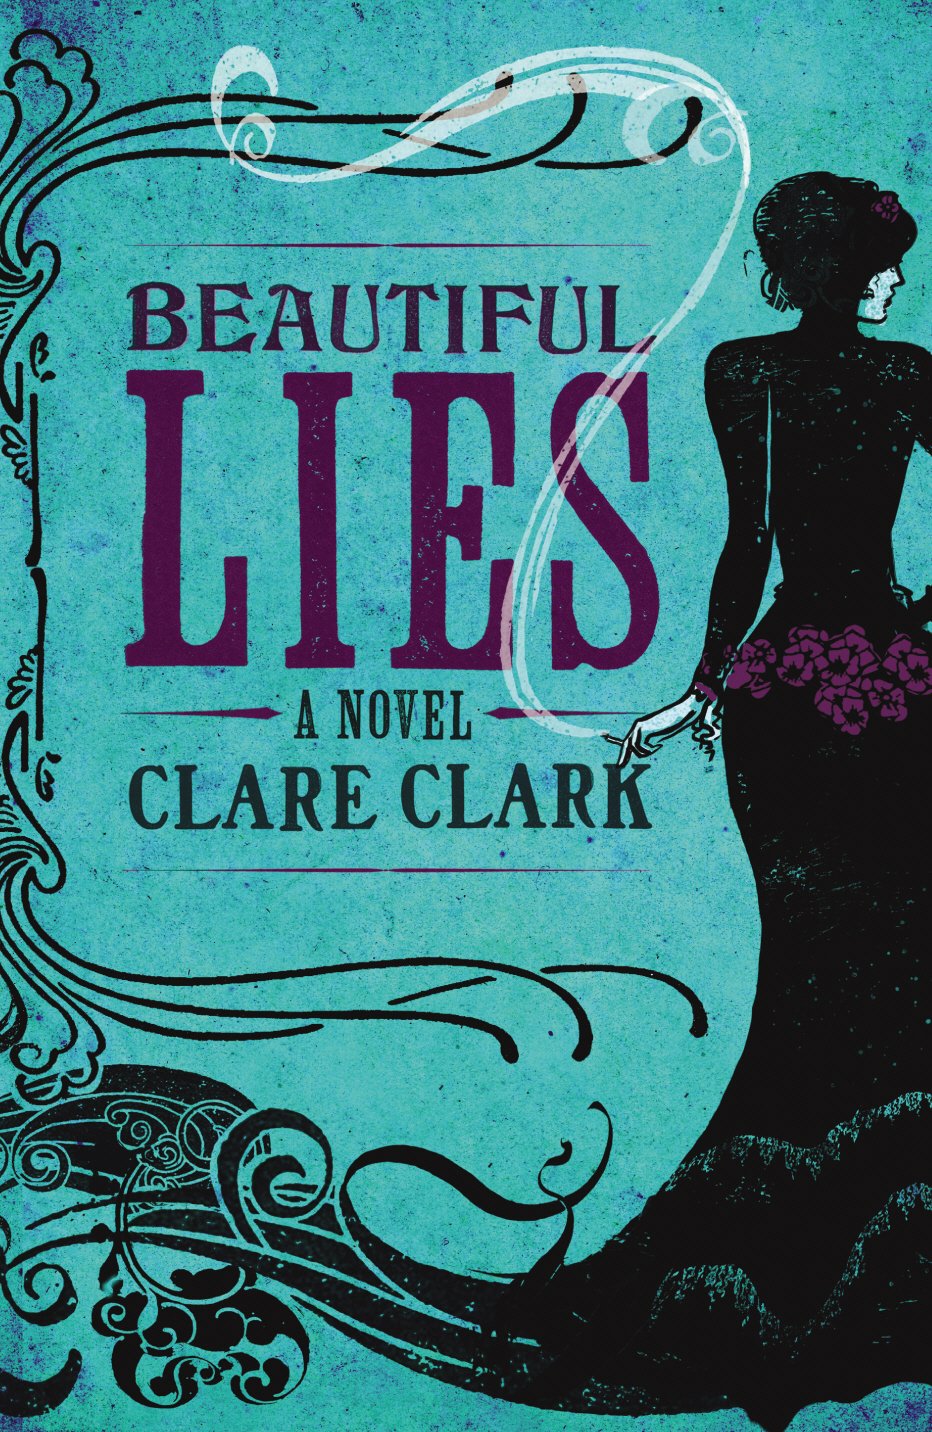 REVIEW: BEAUTIFUL LIES by Clare Clark